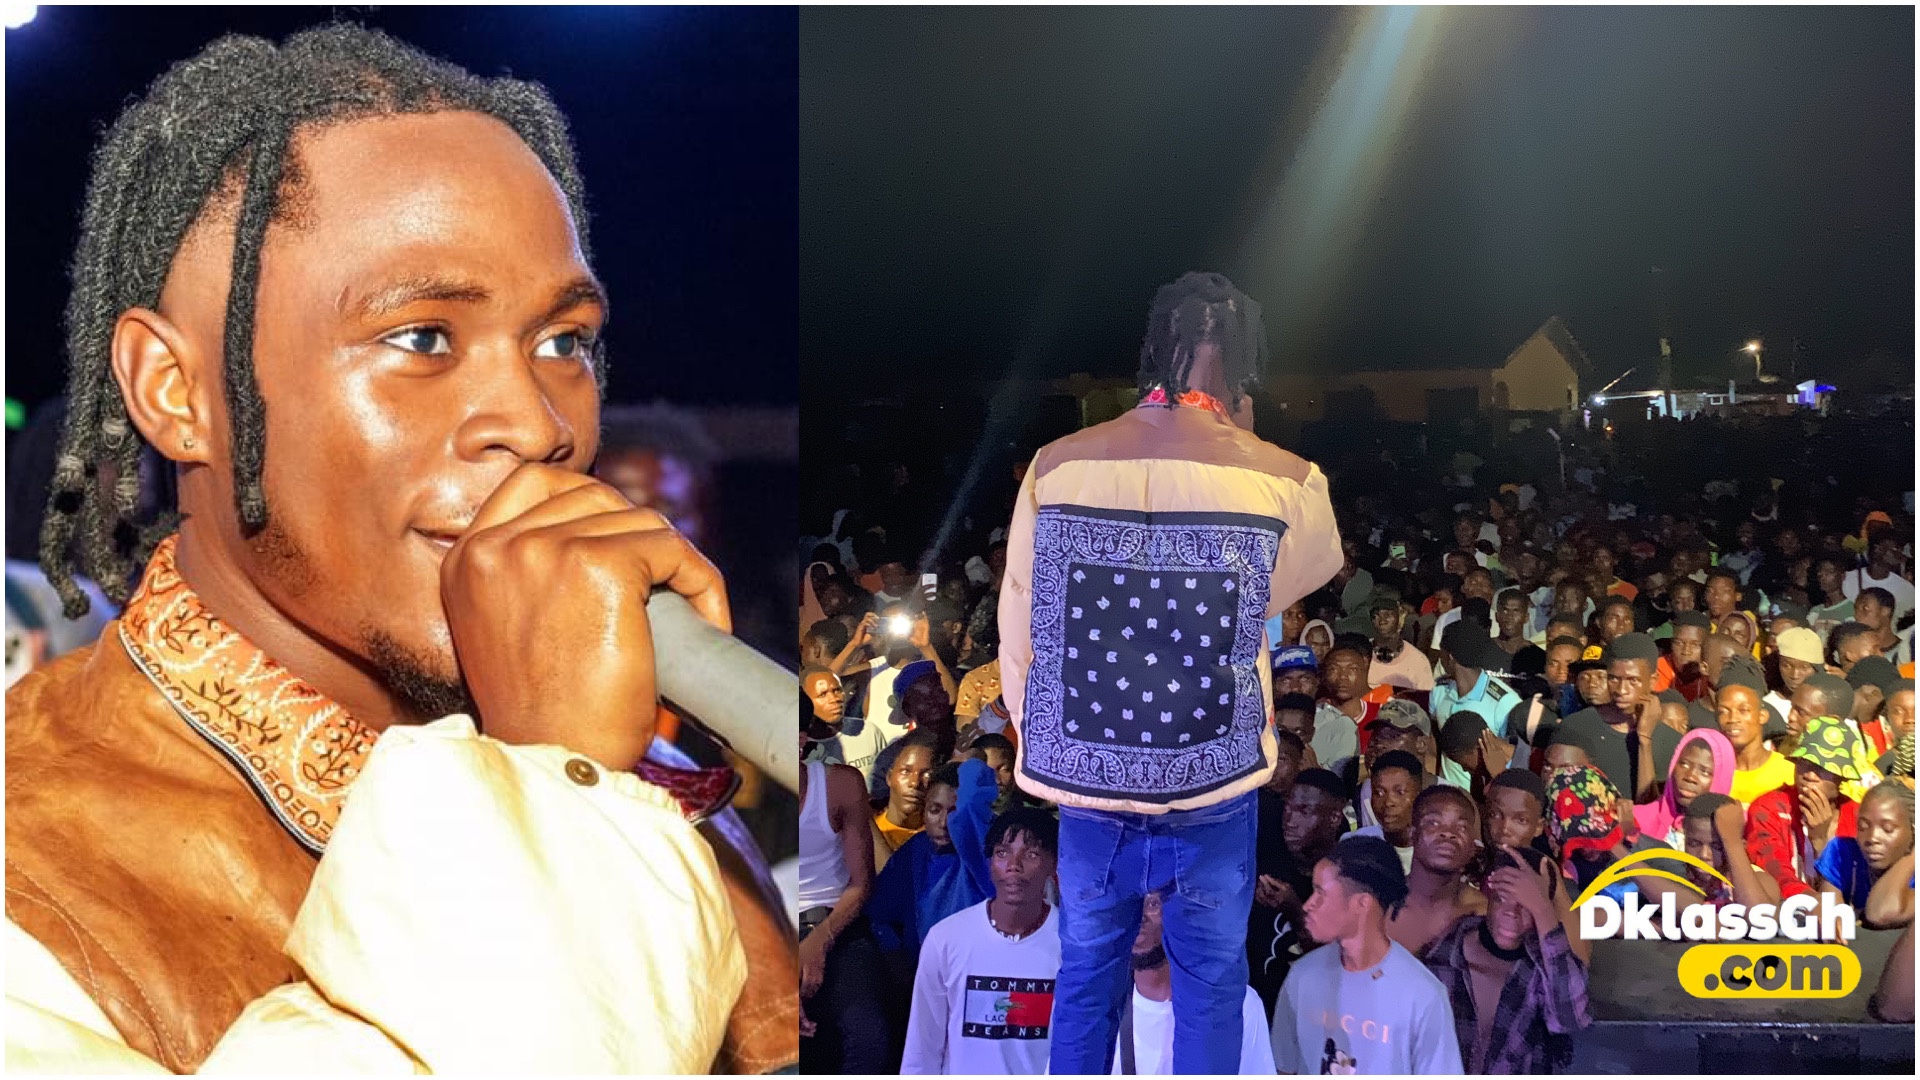 ABOR Goes Haywire As Kpese Boii Blows Their Minds With His Spectacular Performance – Watch Video